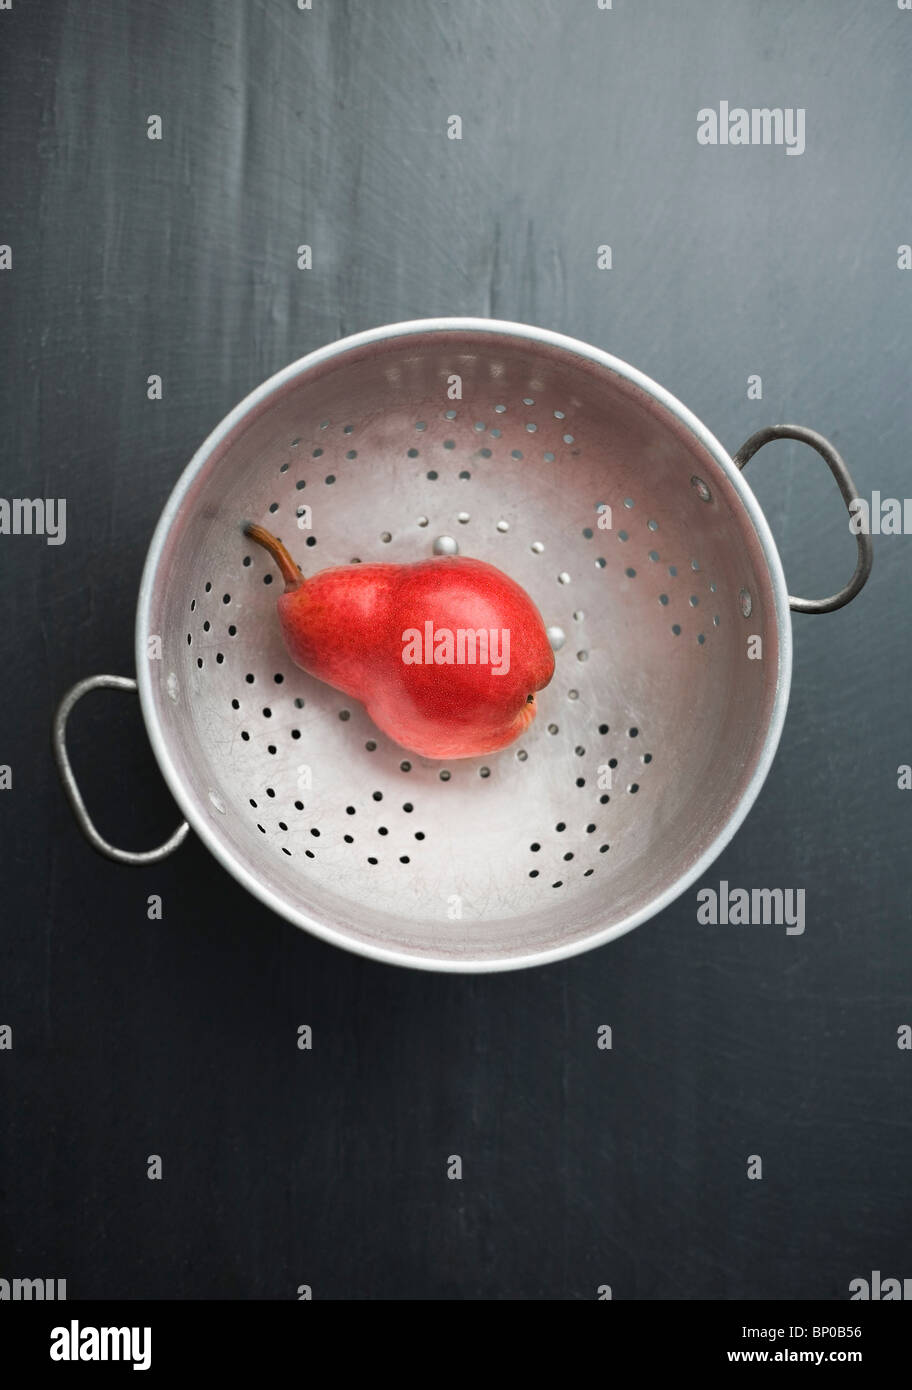 Red pear on a colander Stock Photo